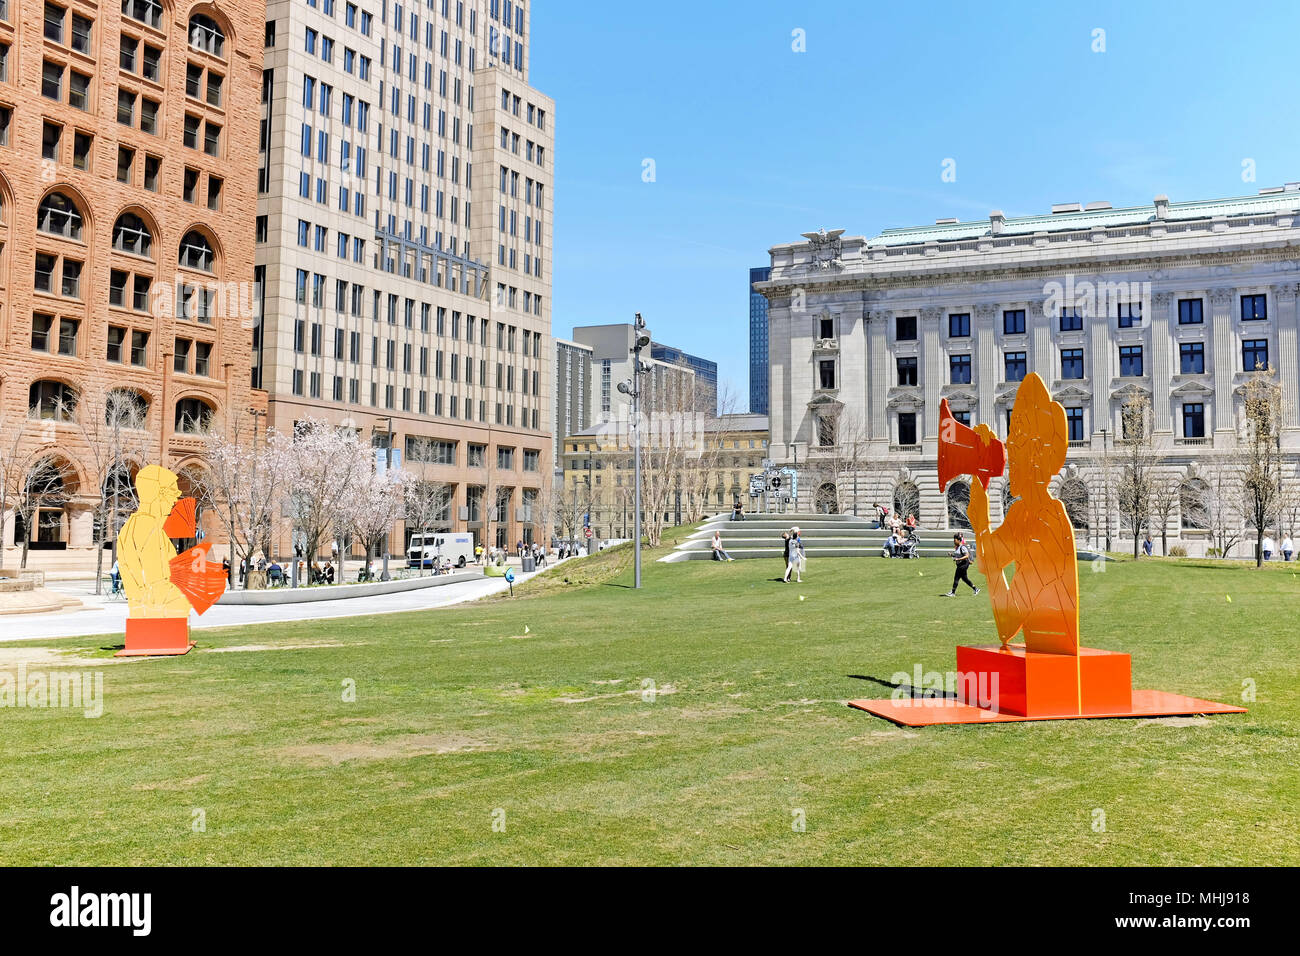 'Protest' art by Olalekan Jeyifous in downtown Cleveland, Ohio, public square reflects the political climate of the US. Stock Photo